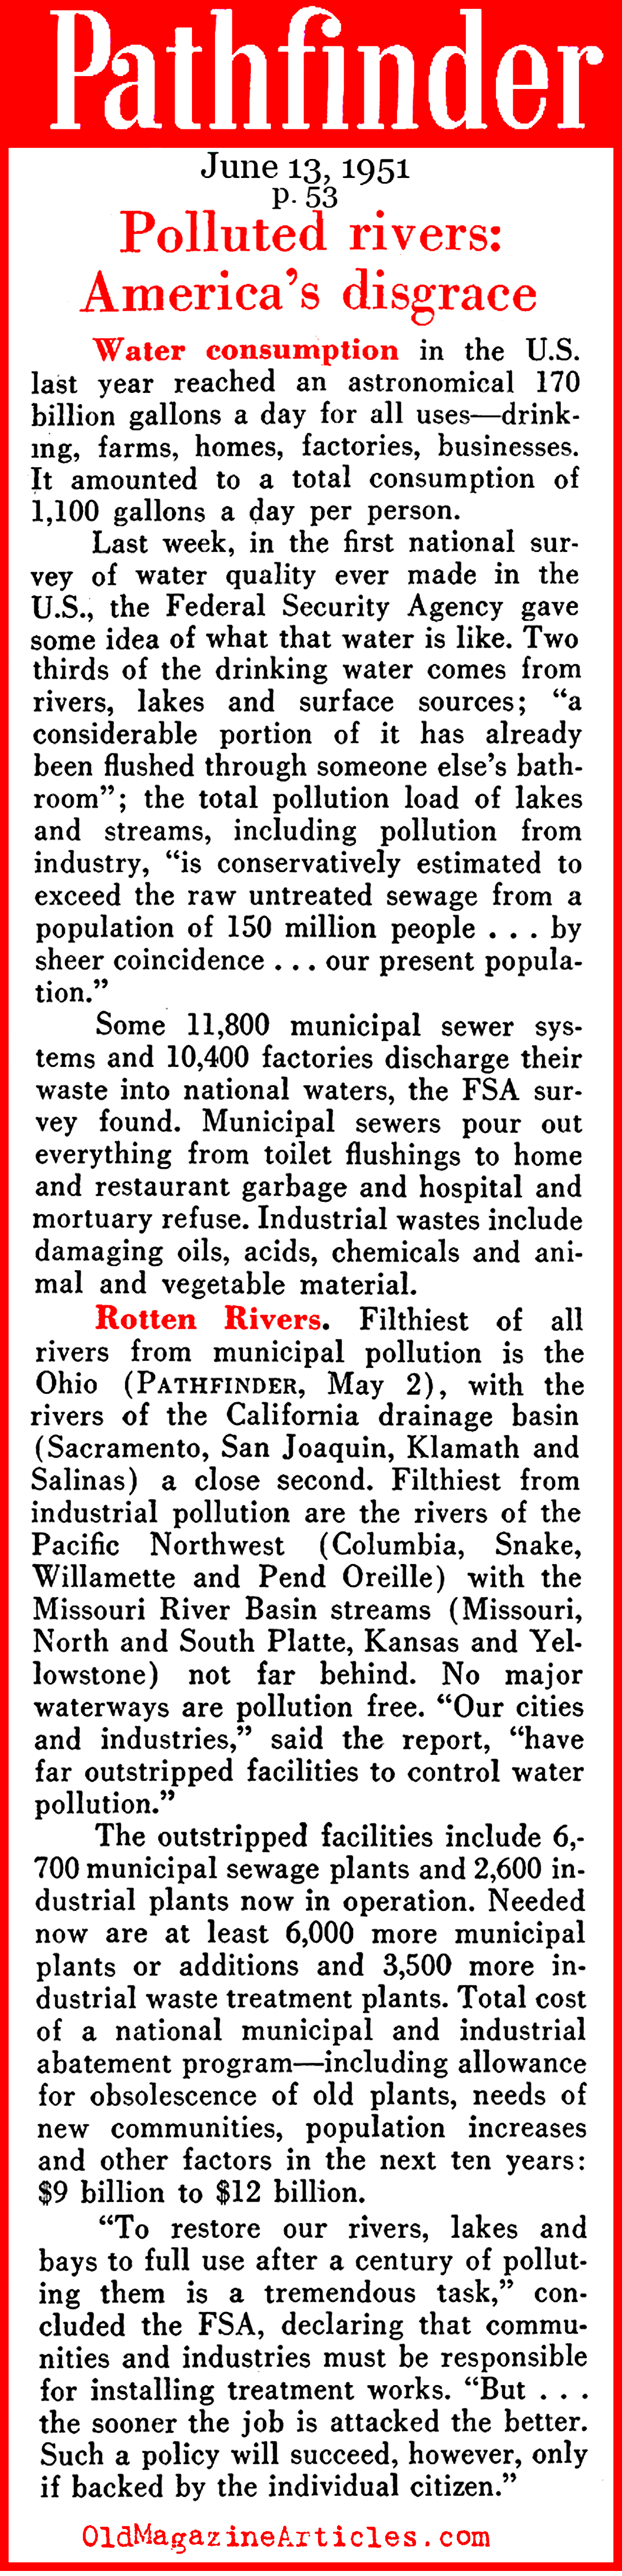 America's Disgrace: Polluted Rivers (Pathfinder Magazine, 1951)